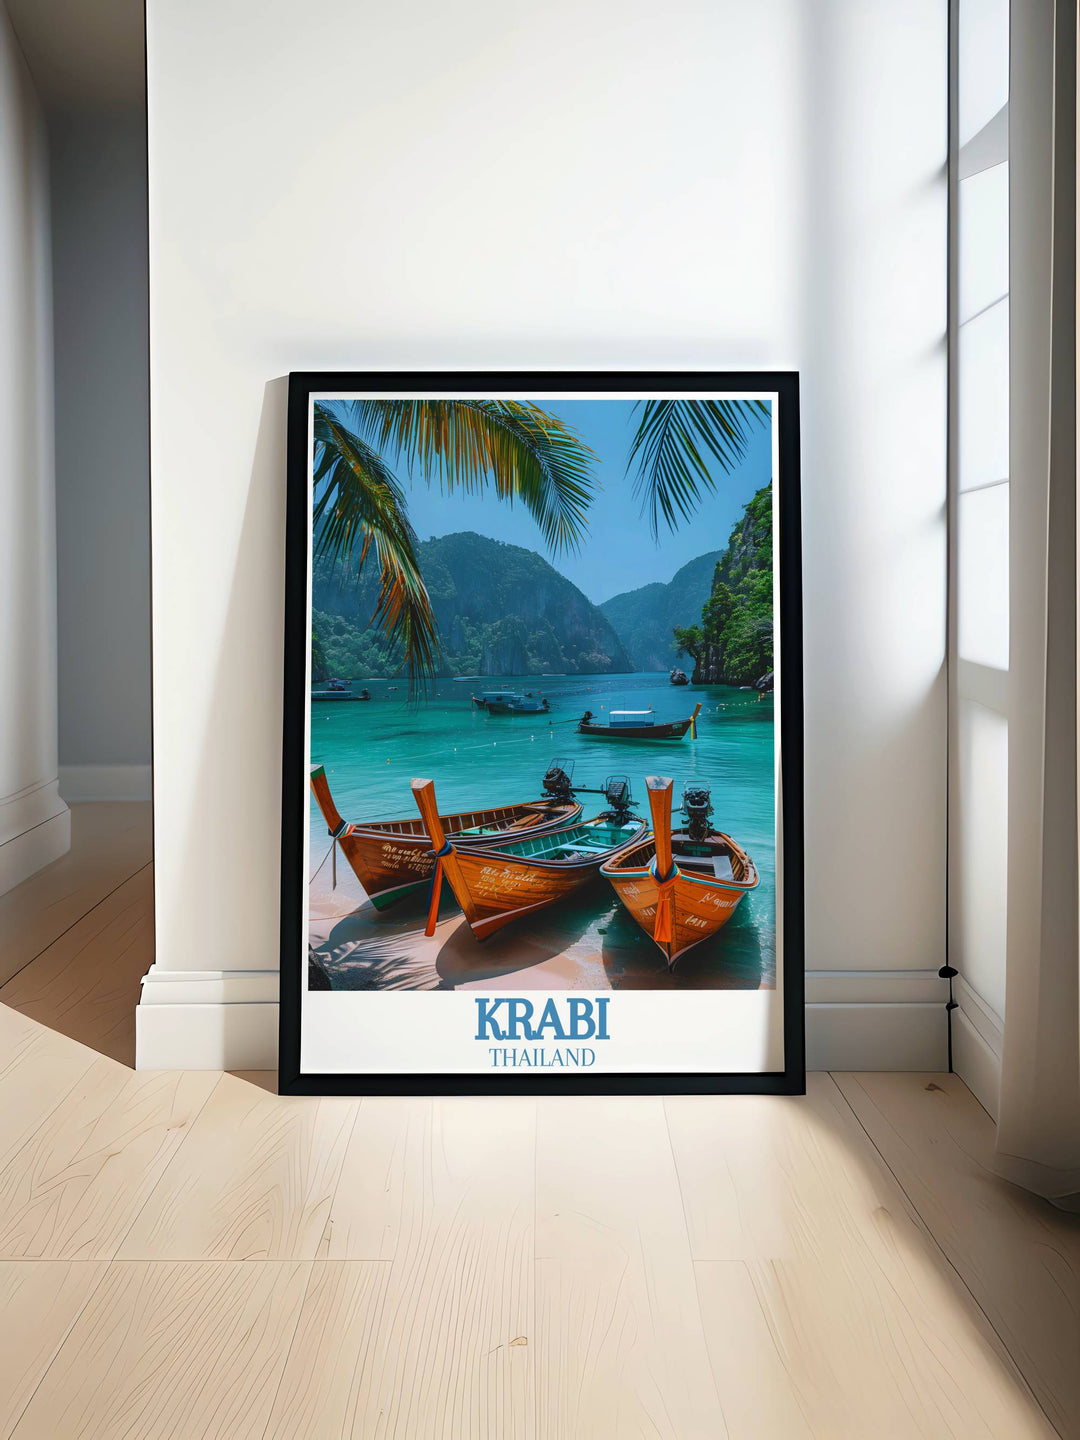 Explore the stunning beauty of Krabi Island and the Phi Phi Islands with this vibrant wall art print showcasing serene beaches and lush greenery perfect for adding a touch of tropical paradise to your home decor or as a thoughtful travel gift.